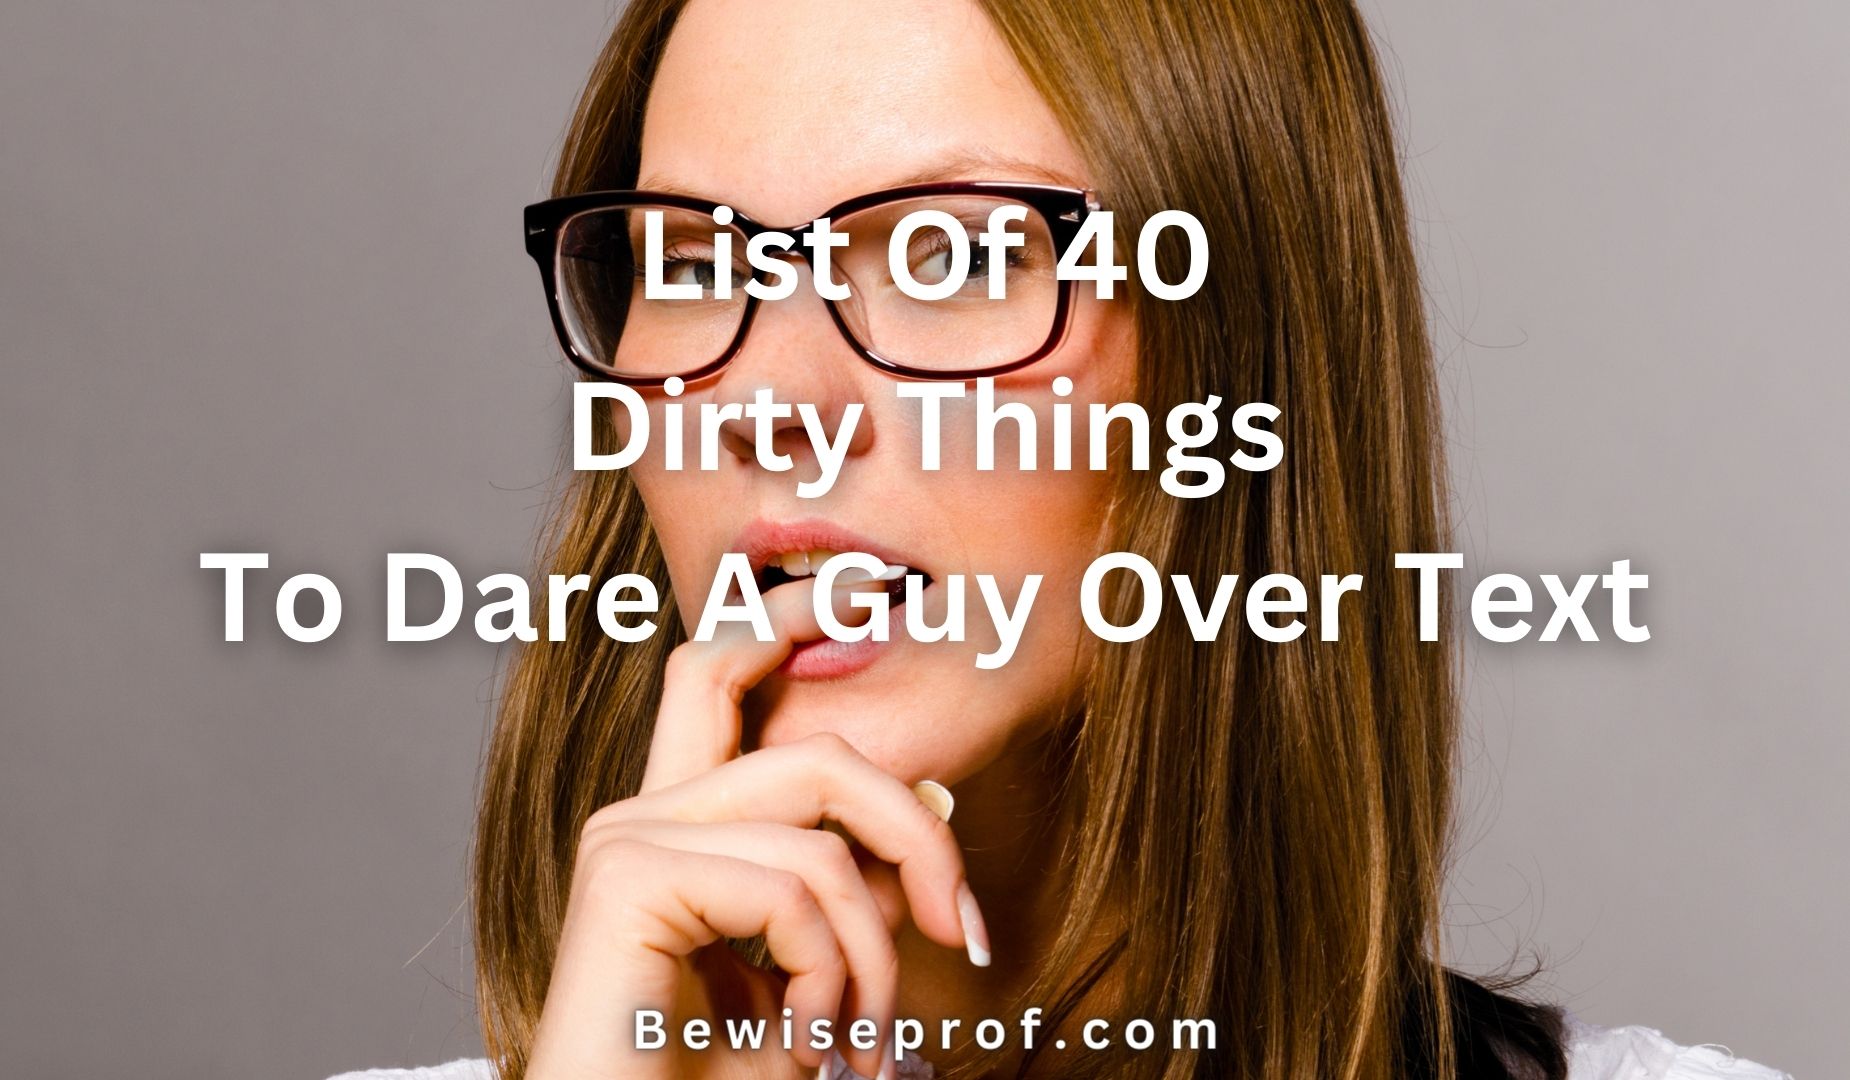 List Of 40 Dirty Things to Dare A Guy Over Text